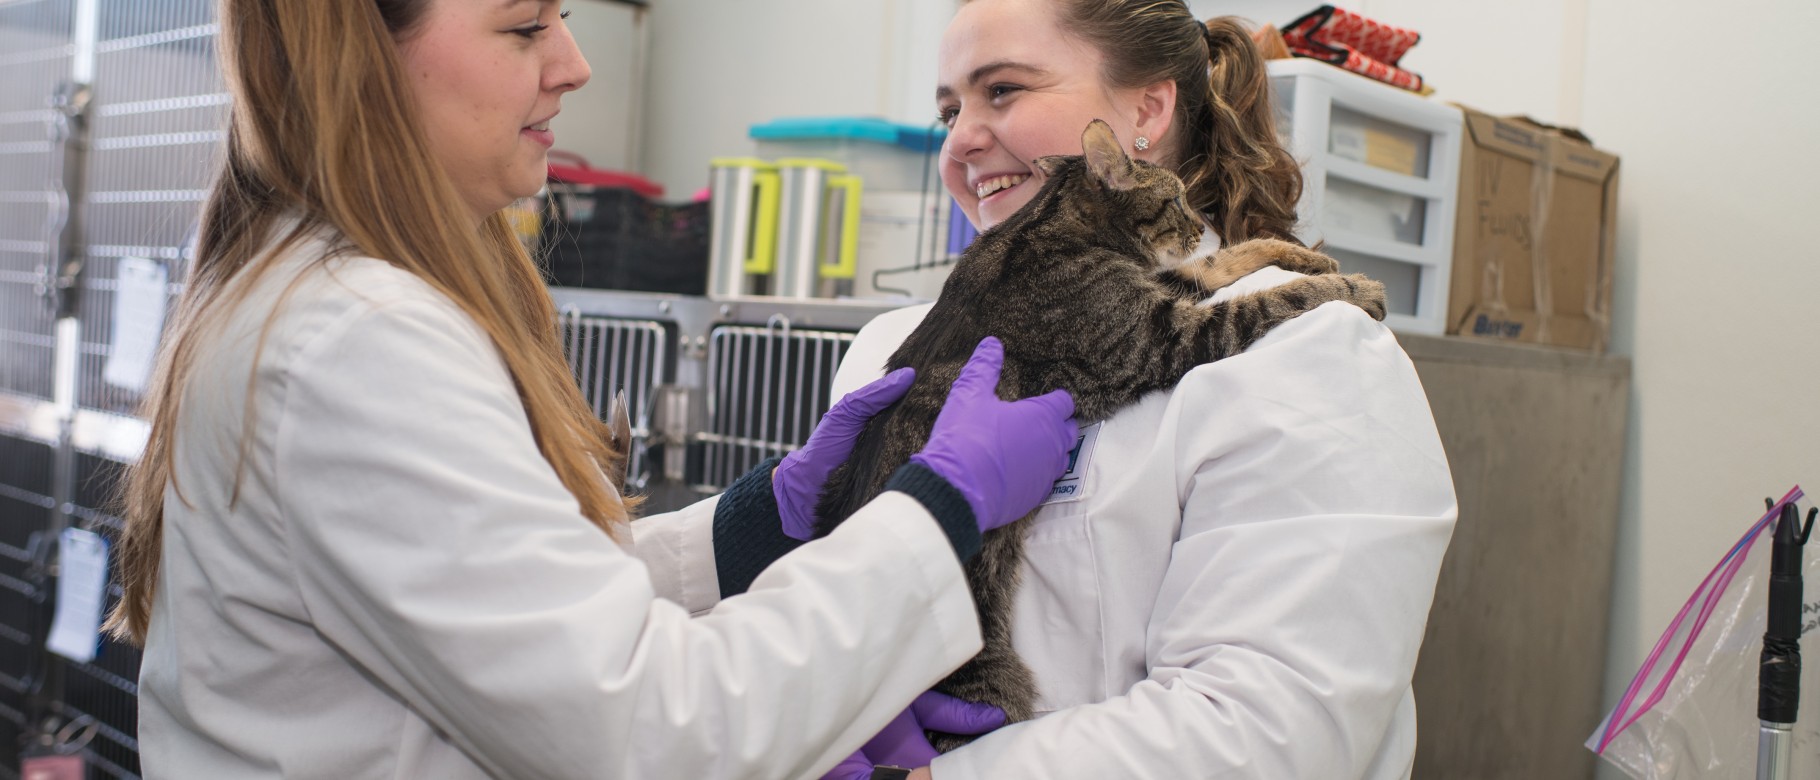 Pharmacy students Evan Carrell and Marlee Smith get a cat ready for medication